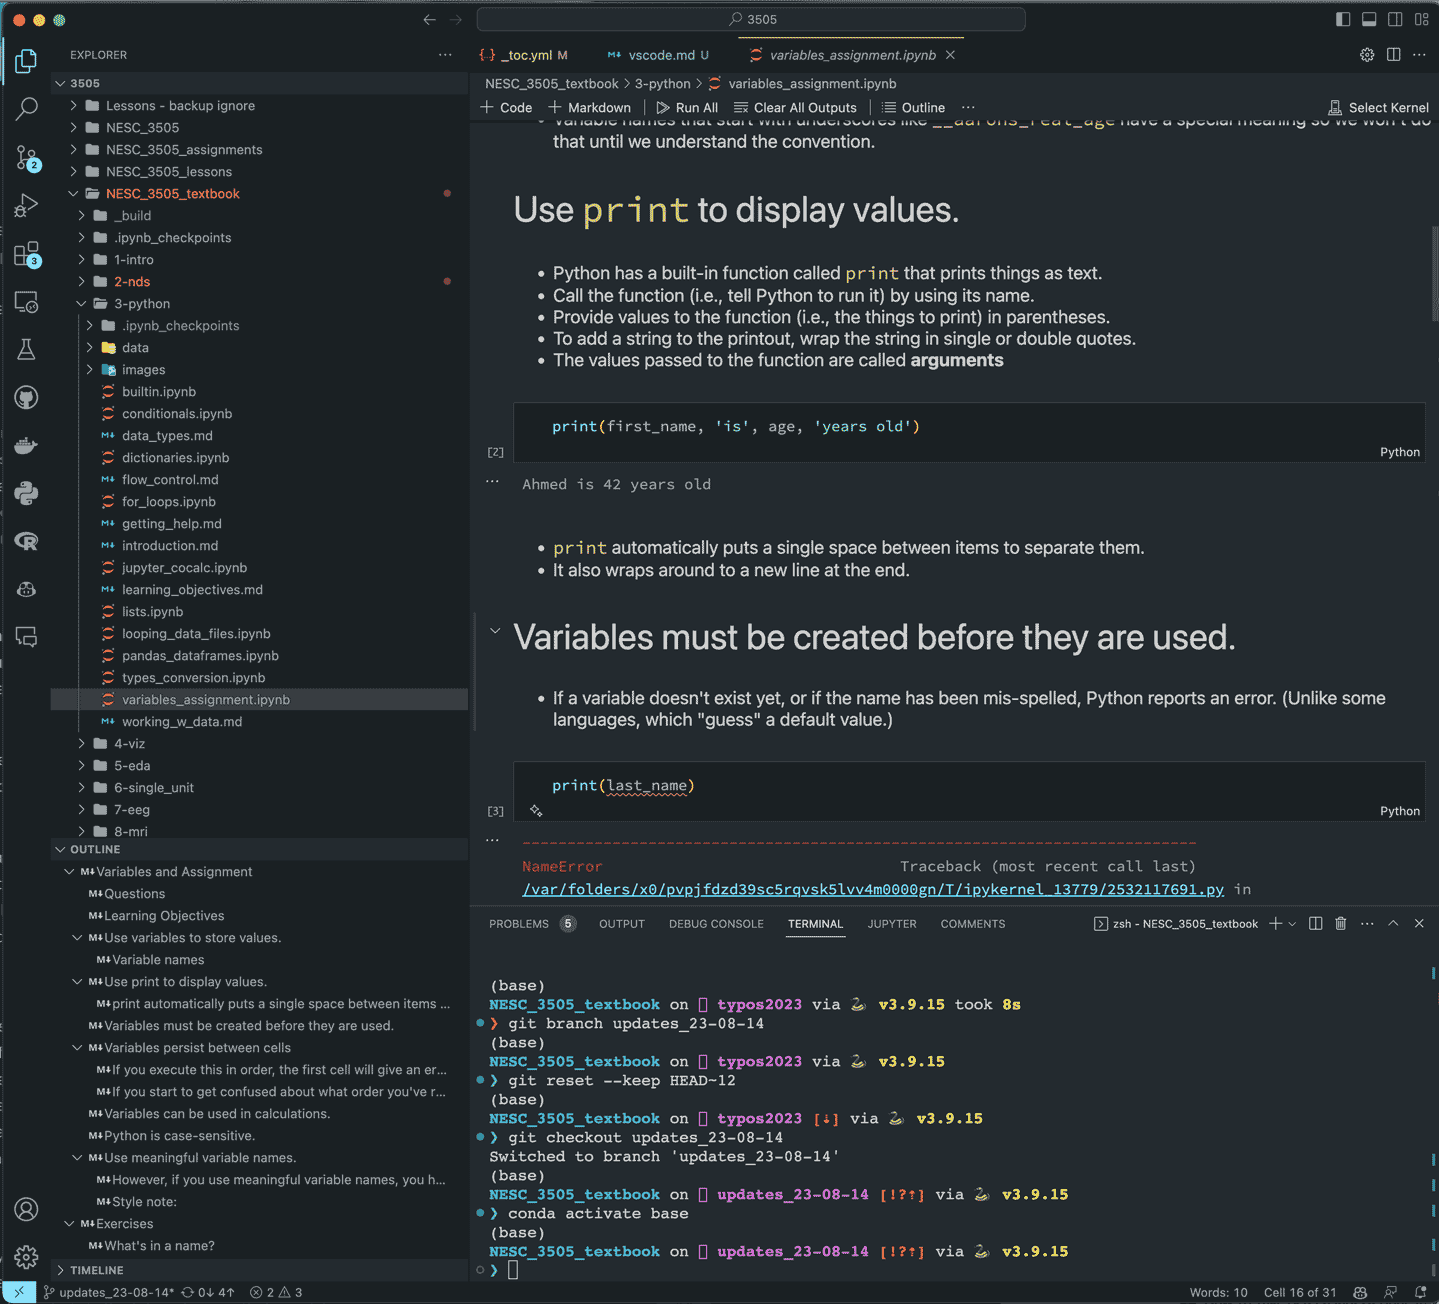 ../_images/vscode.png